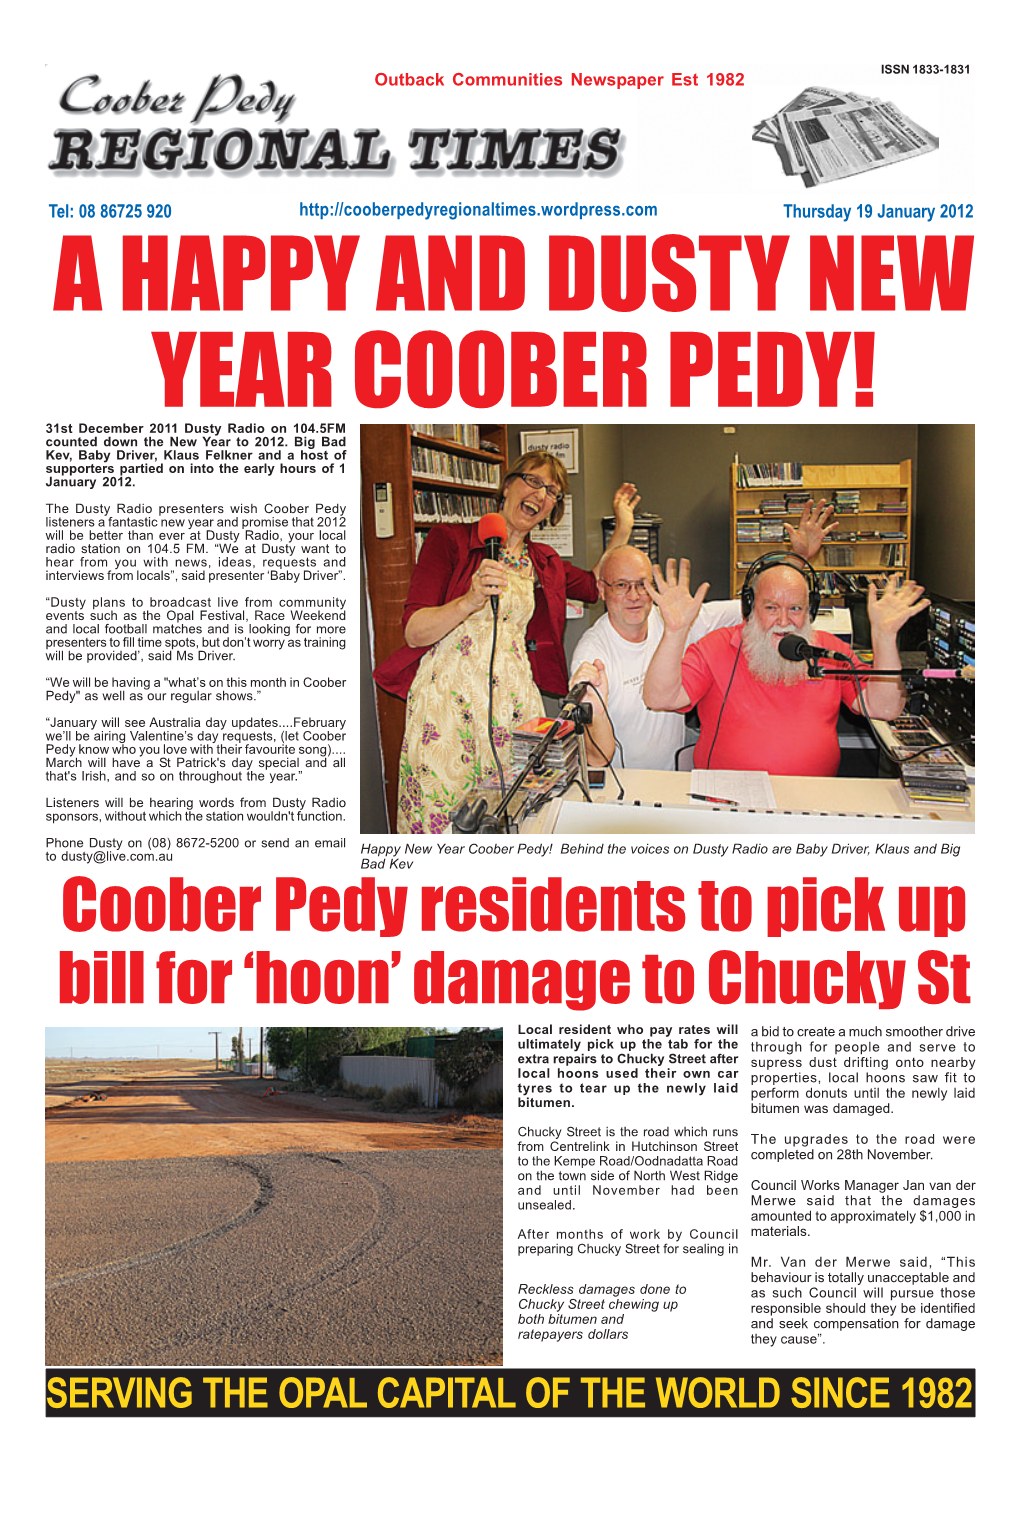 Coober Pedy Residents to Pick Up